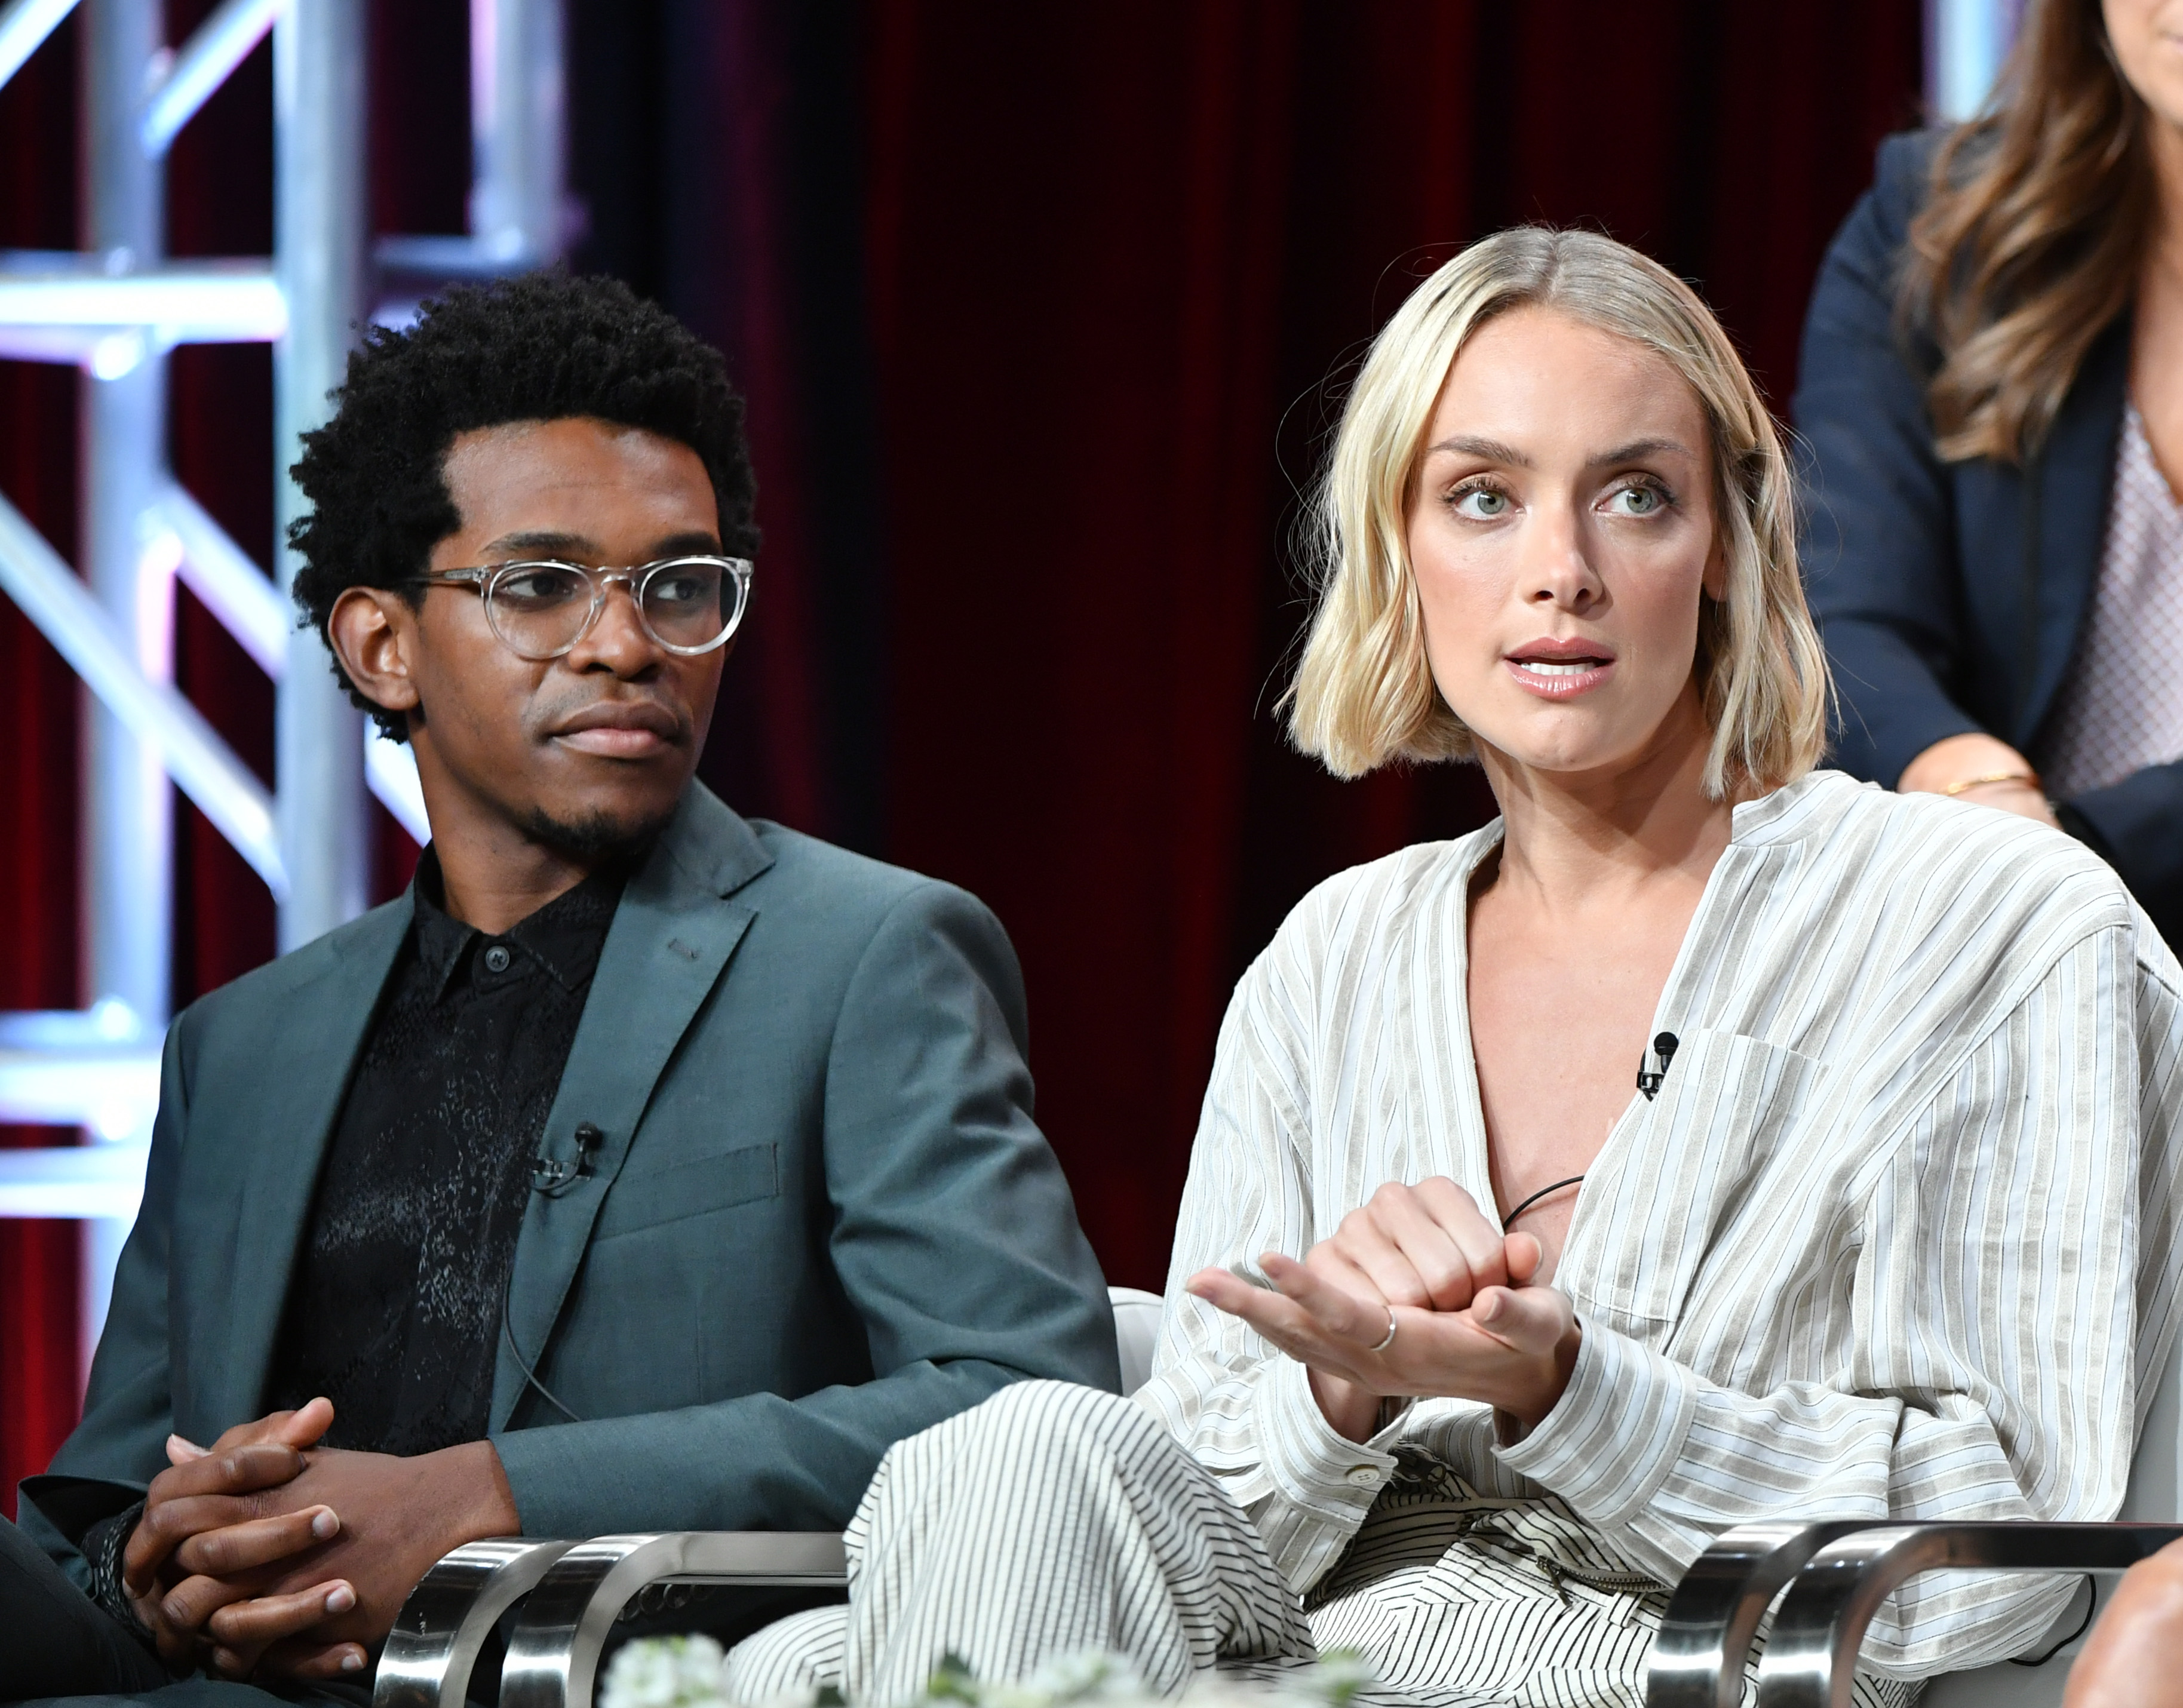 'Batwoman' stars Camrus Johnson, dressed in a gray suit, and Rachel Skarsten, dressed in a white striped shirt, speak onstage.